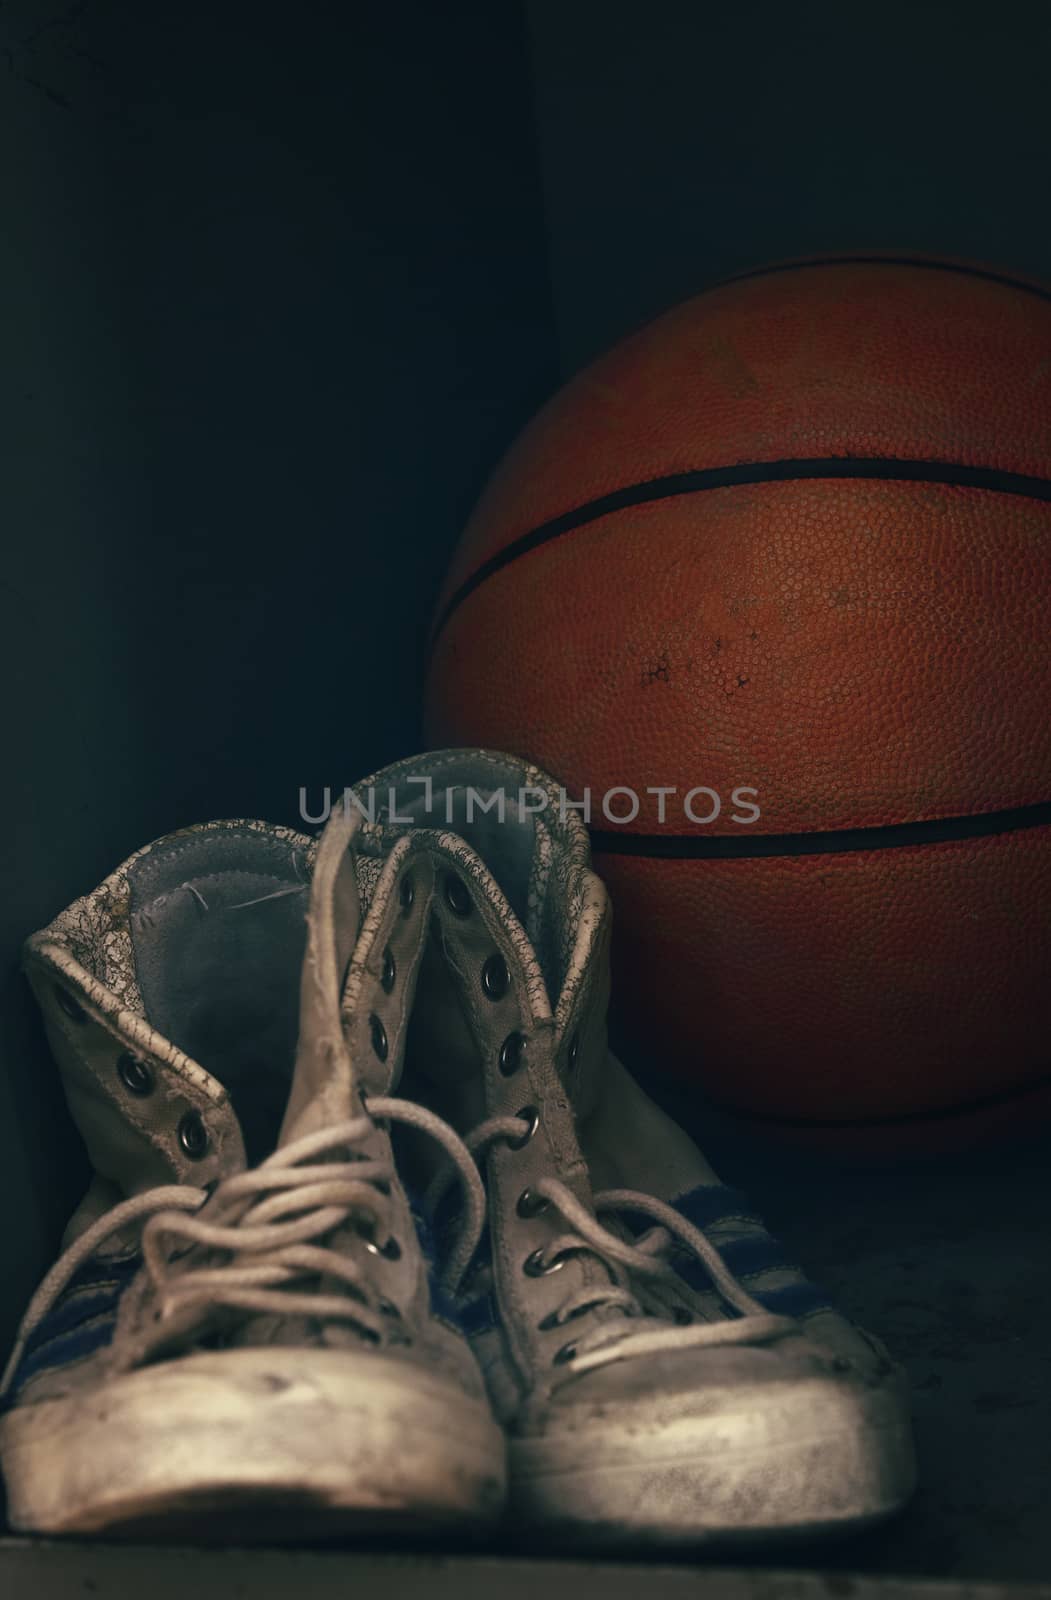 Close up pair of old worn sport sneakers shoes and one basketball ball in locker, low angle view